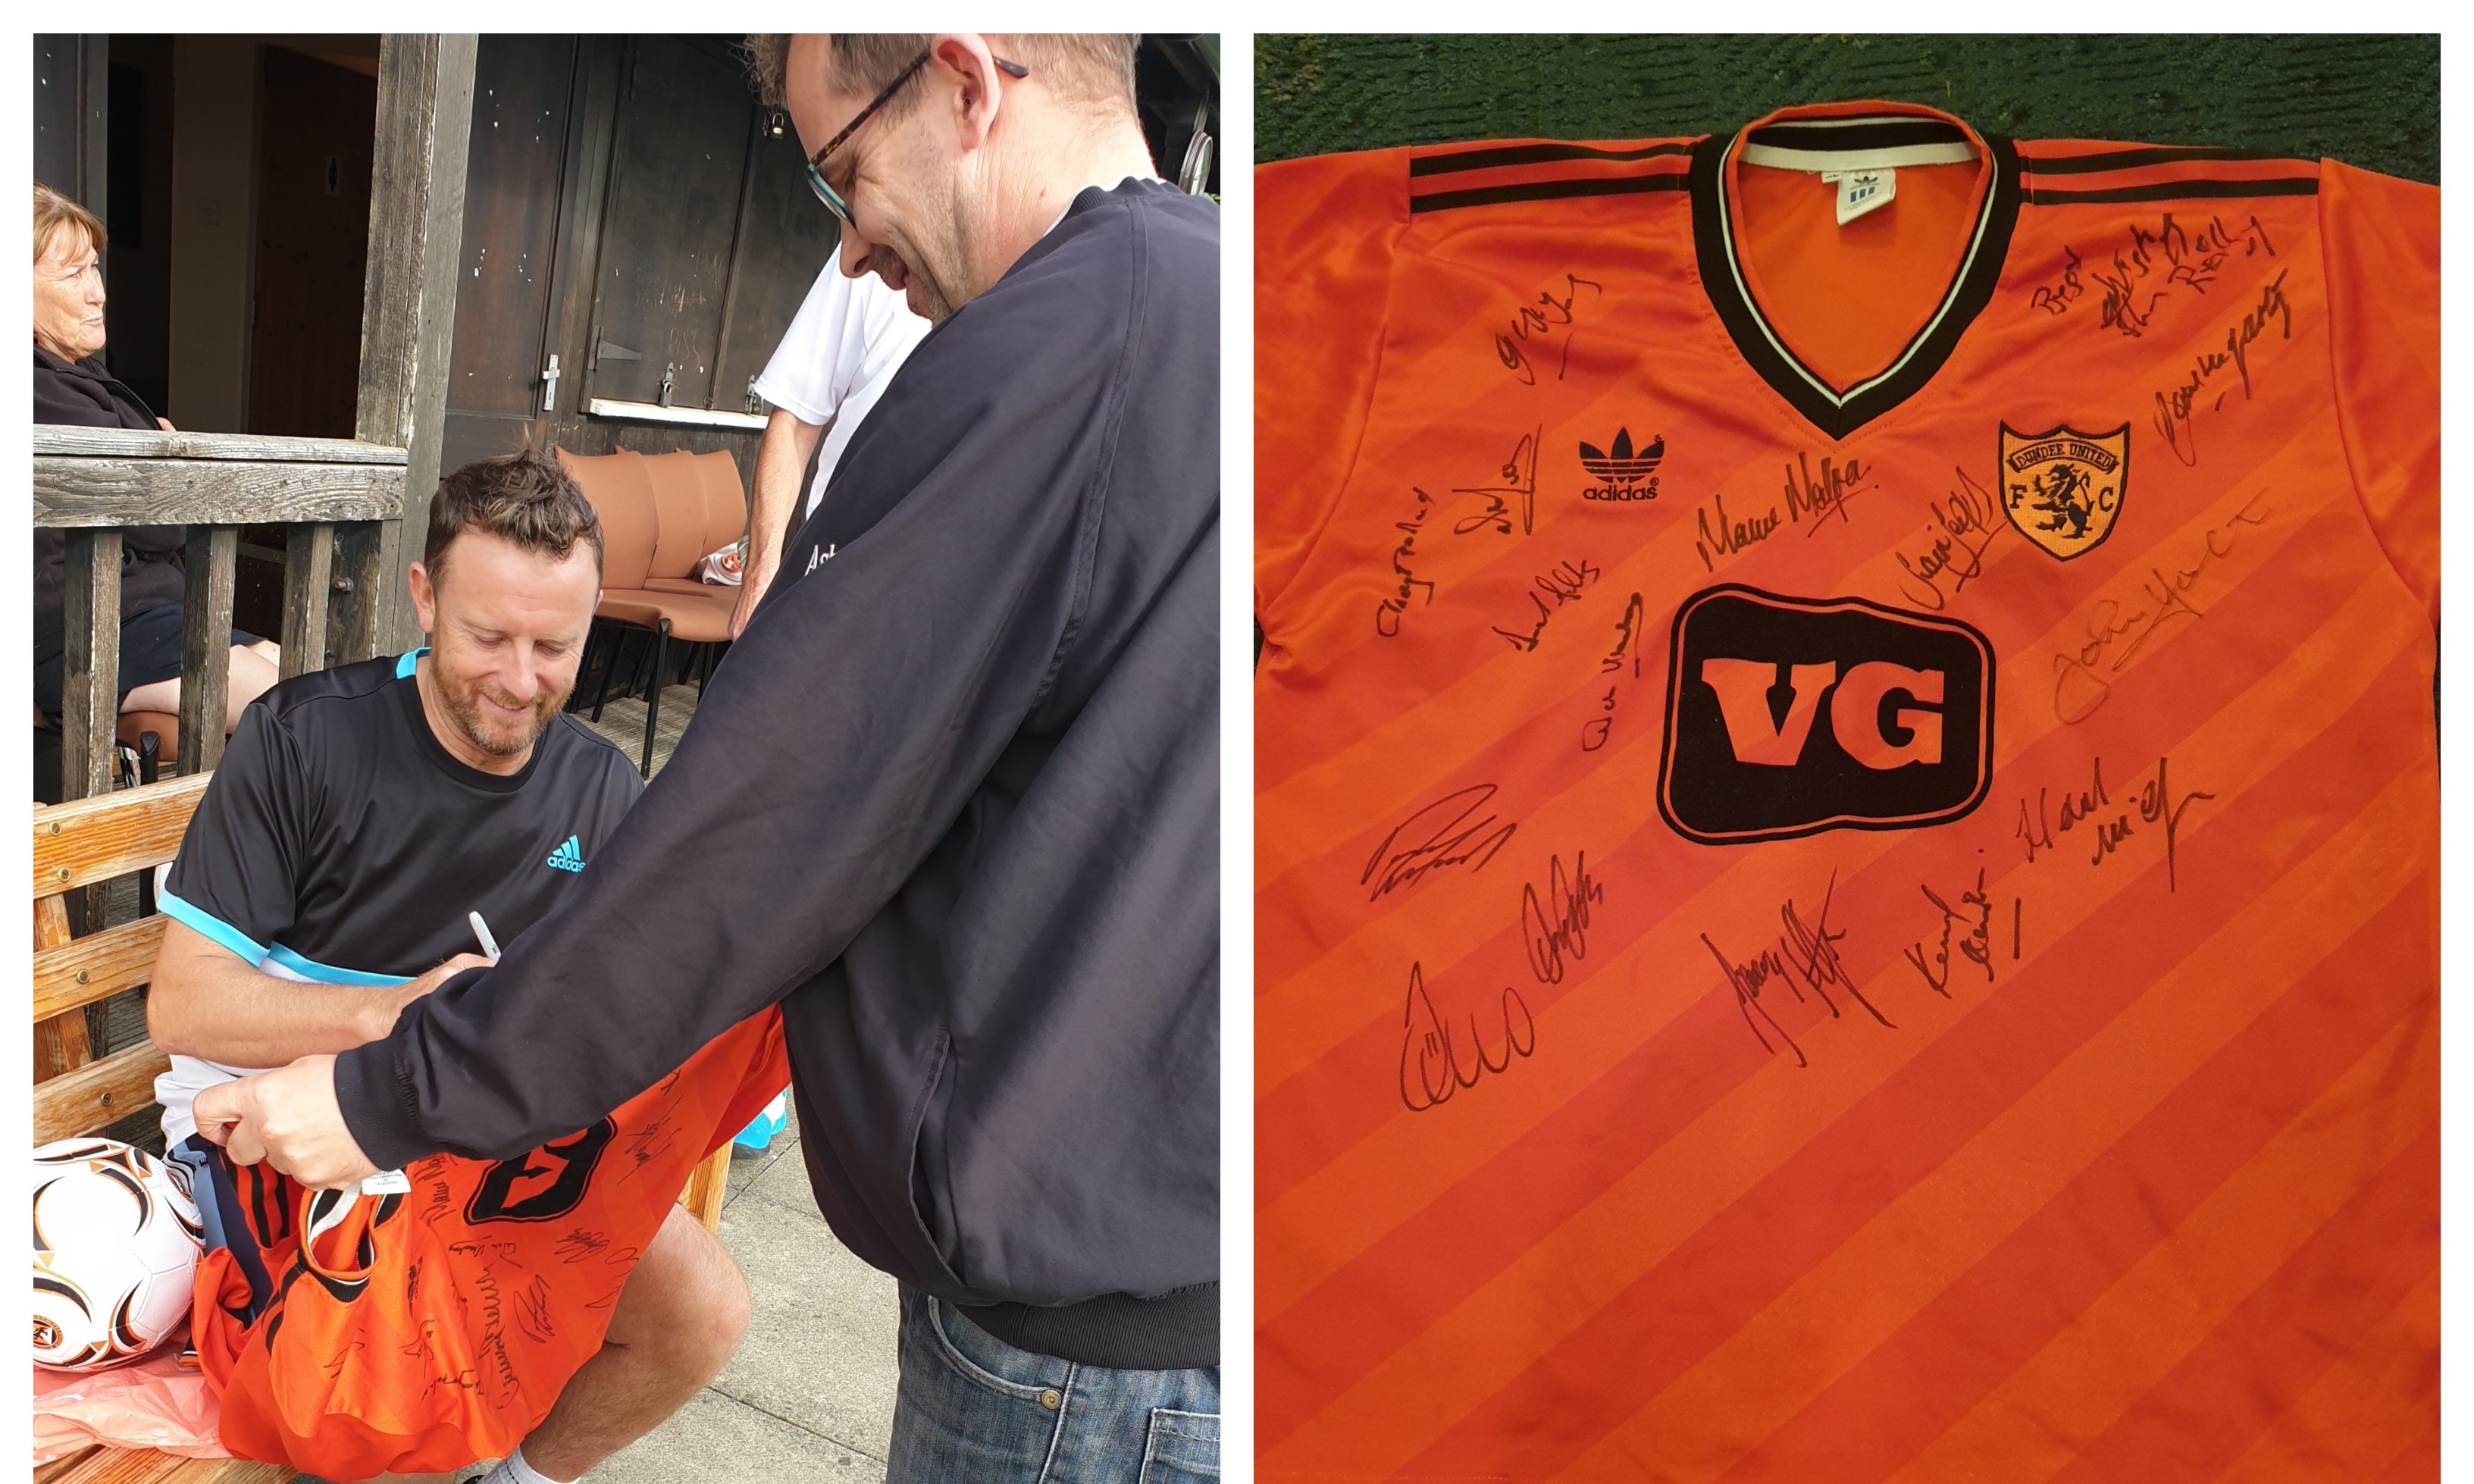 Kevin Gallacher signs Andy's top, right